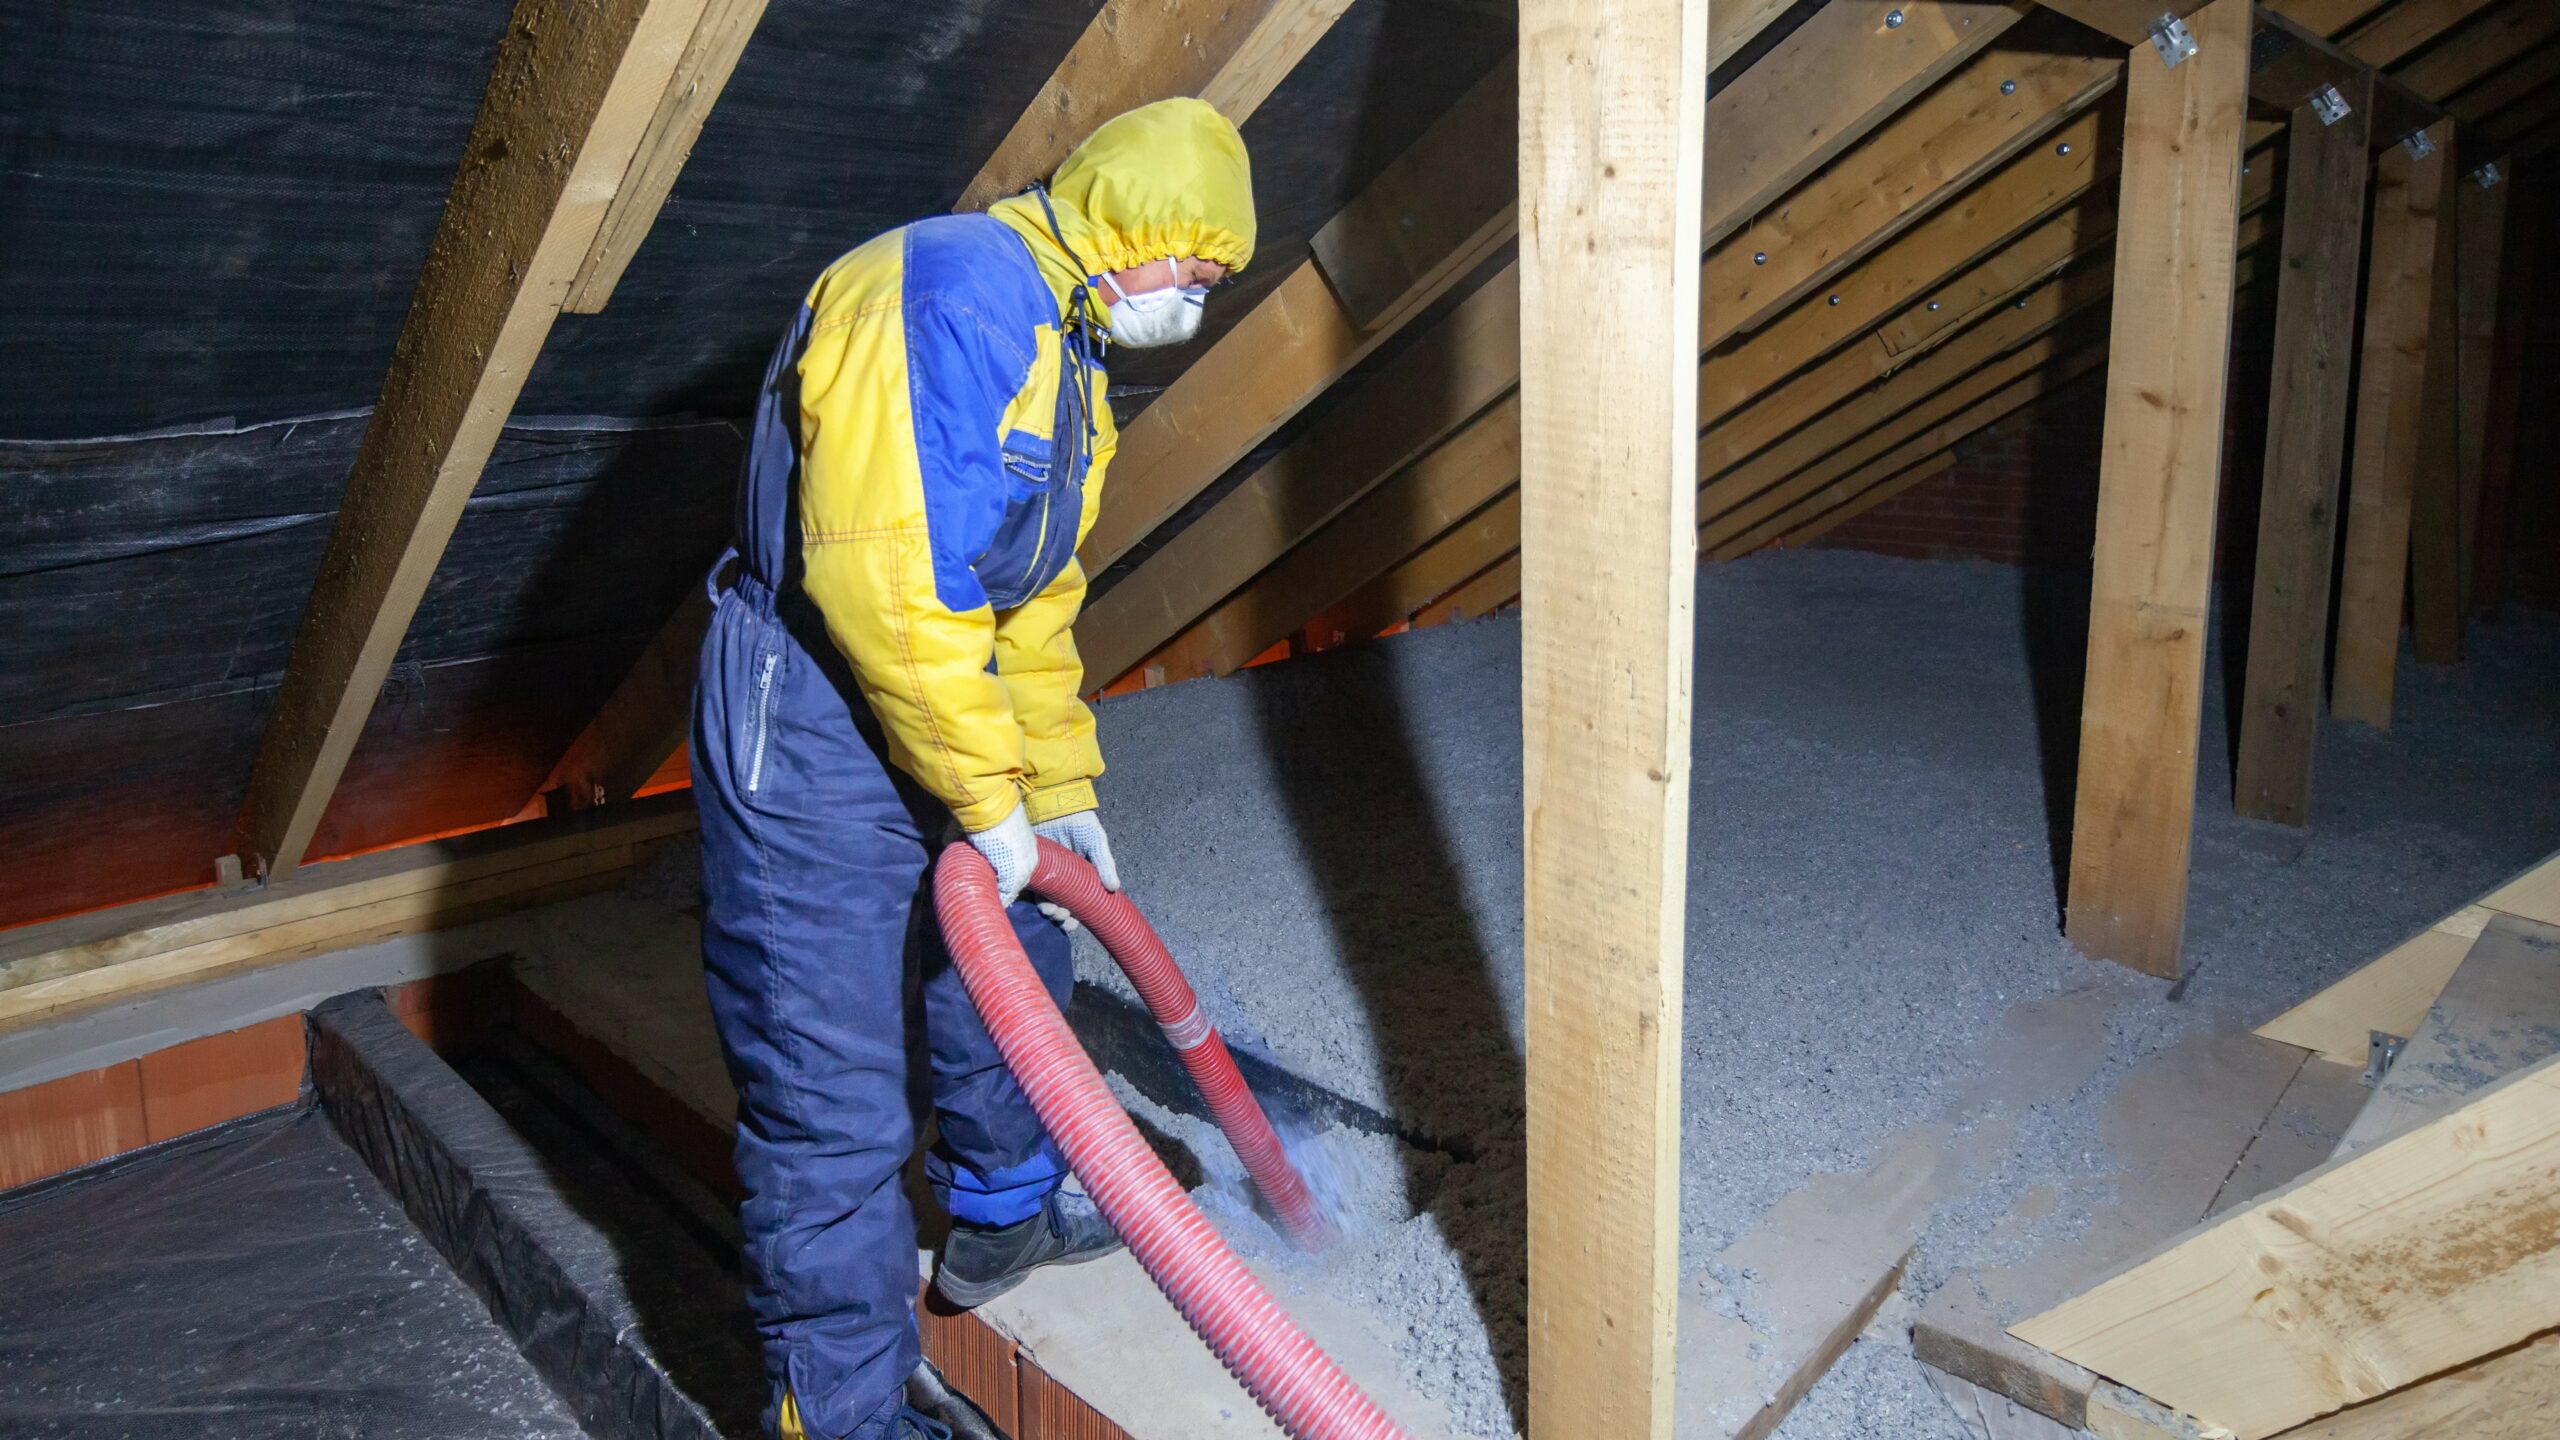 Cellulose insulation being installed in attic.